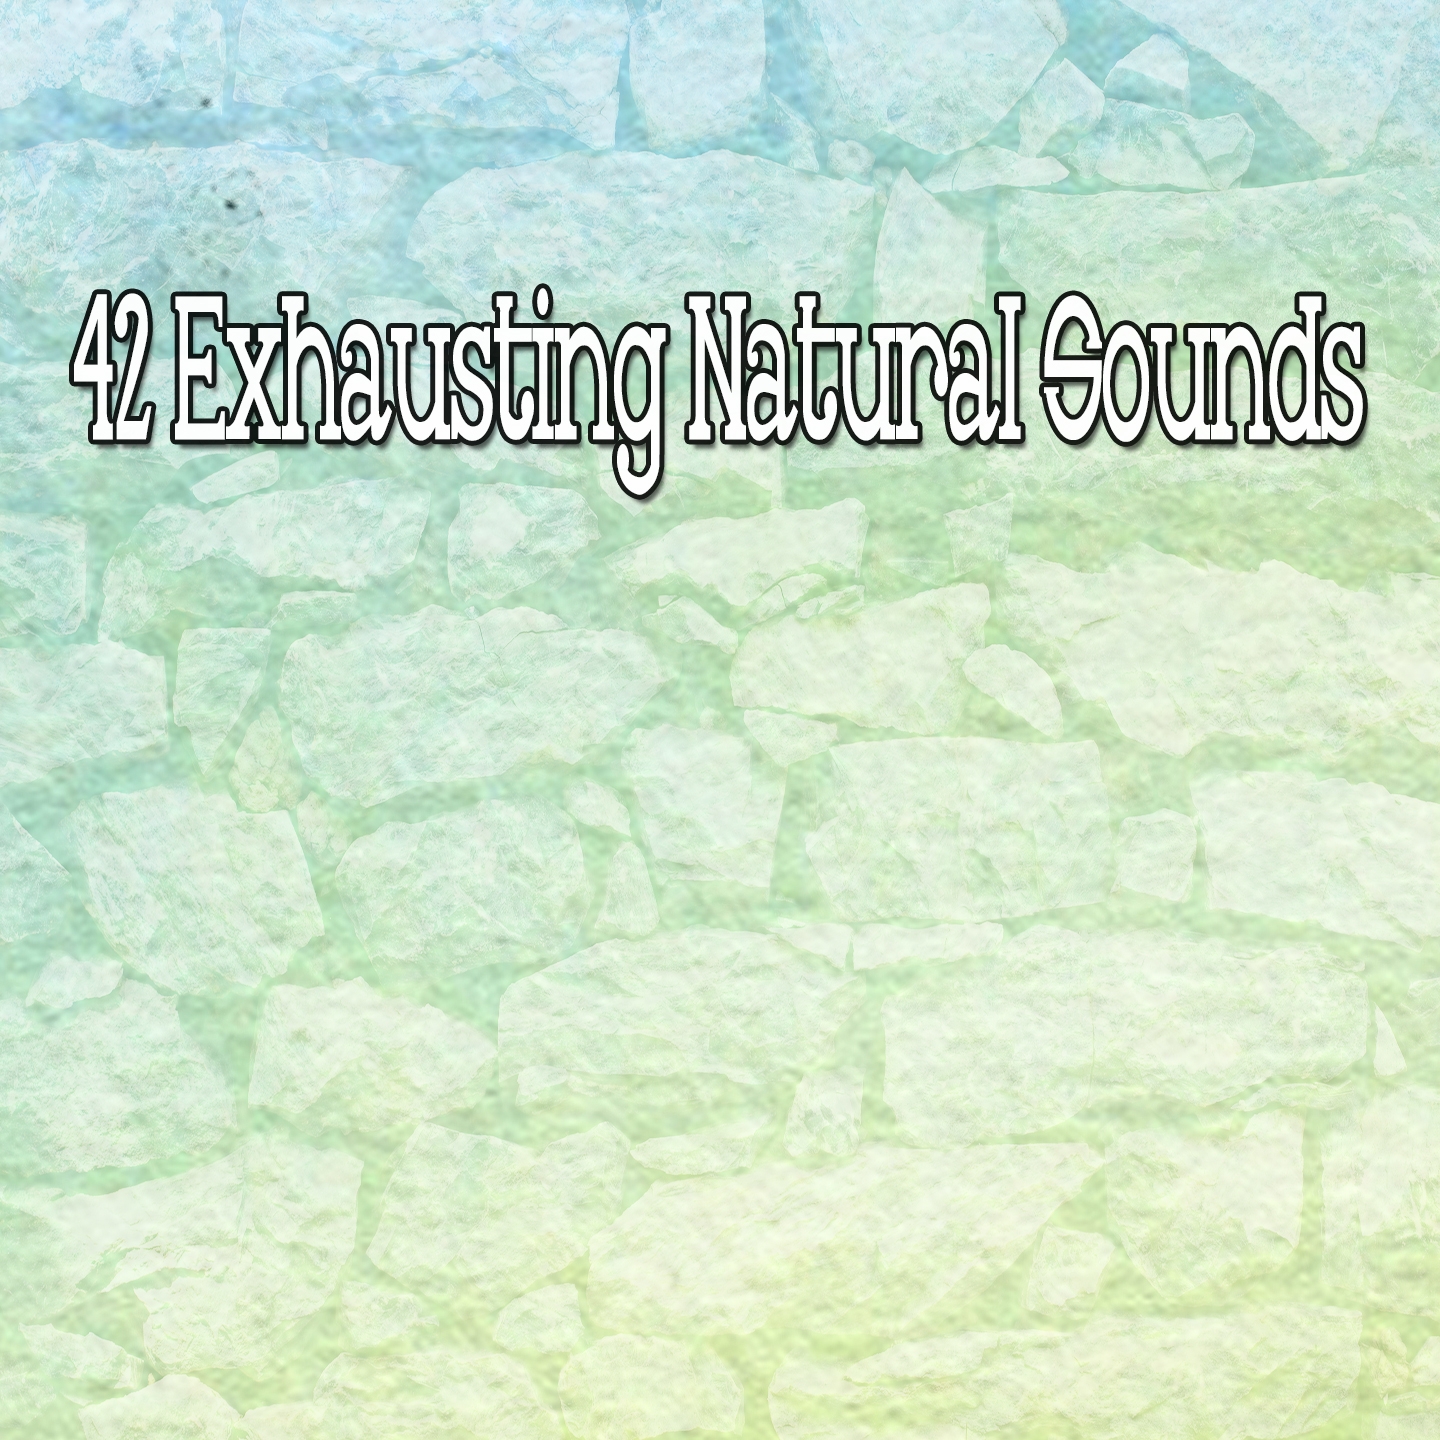 42 Exhausting Natural Sounds